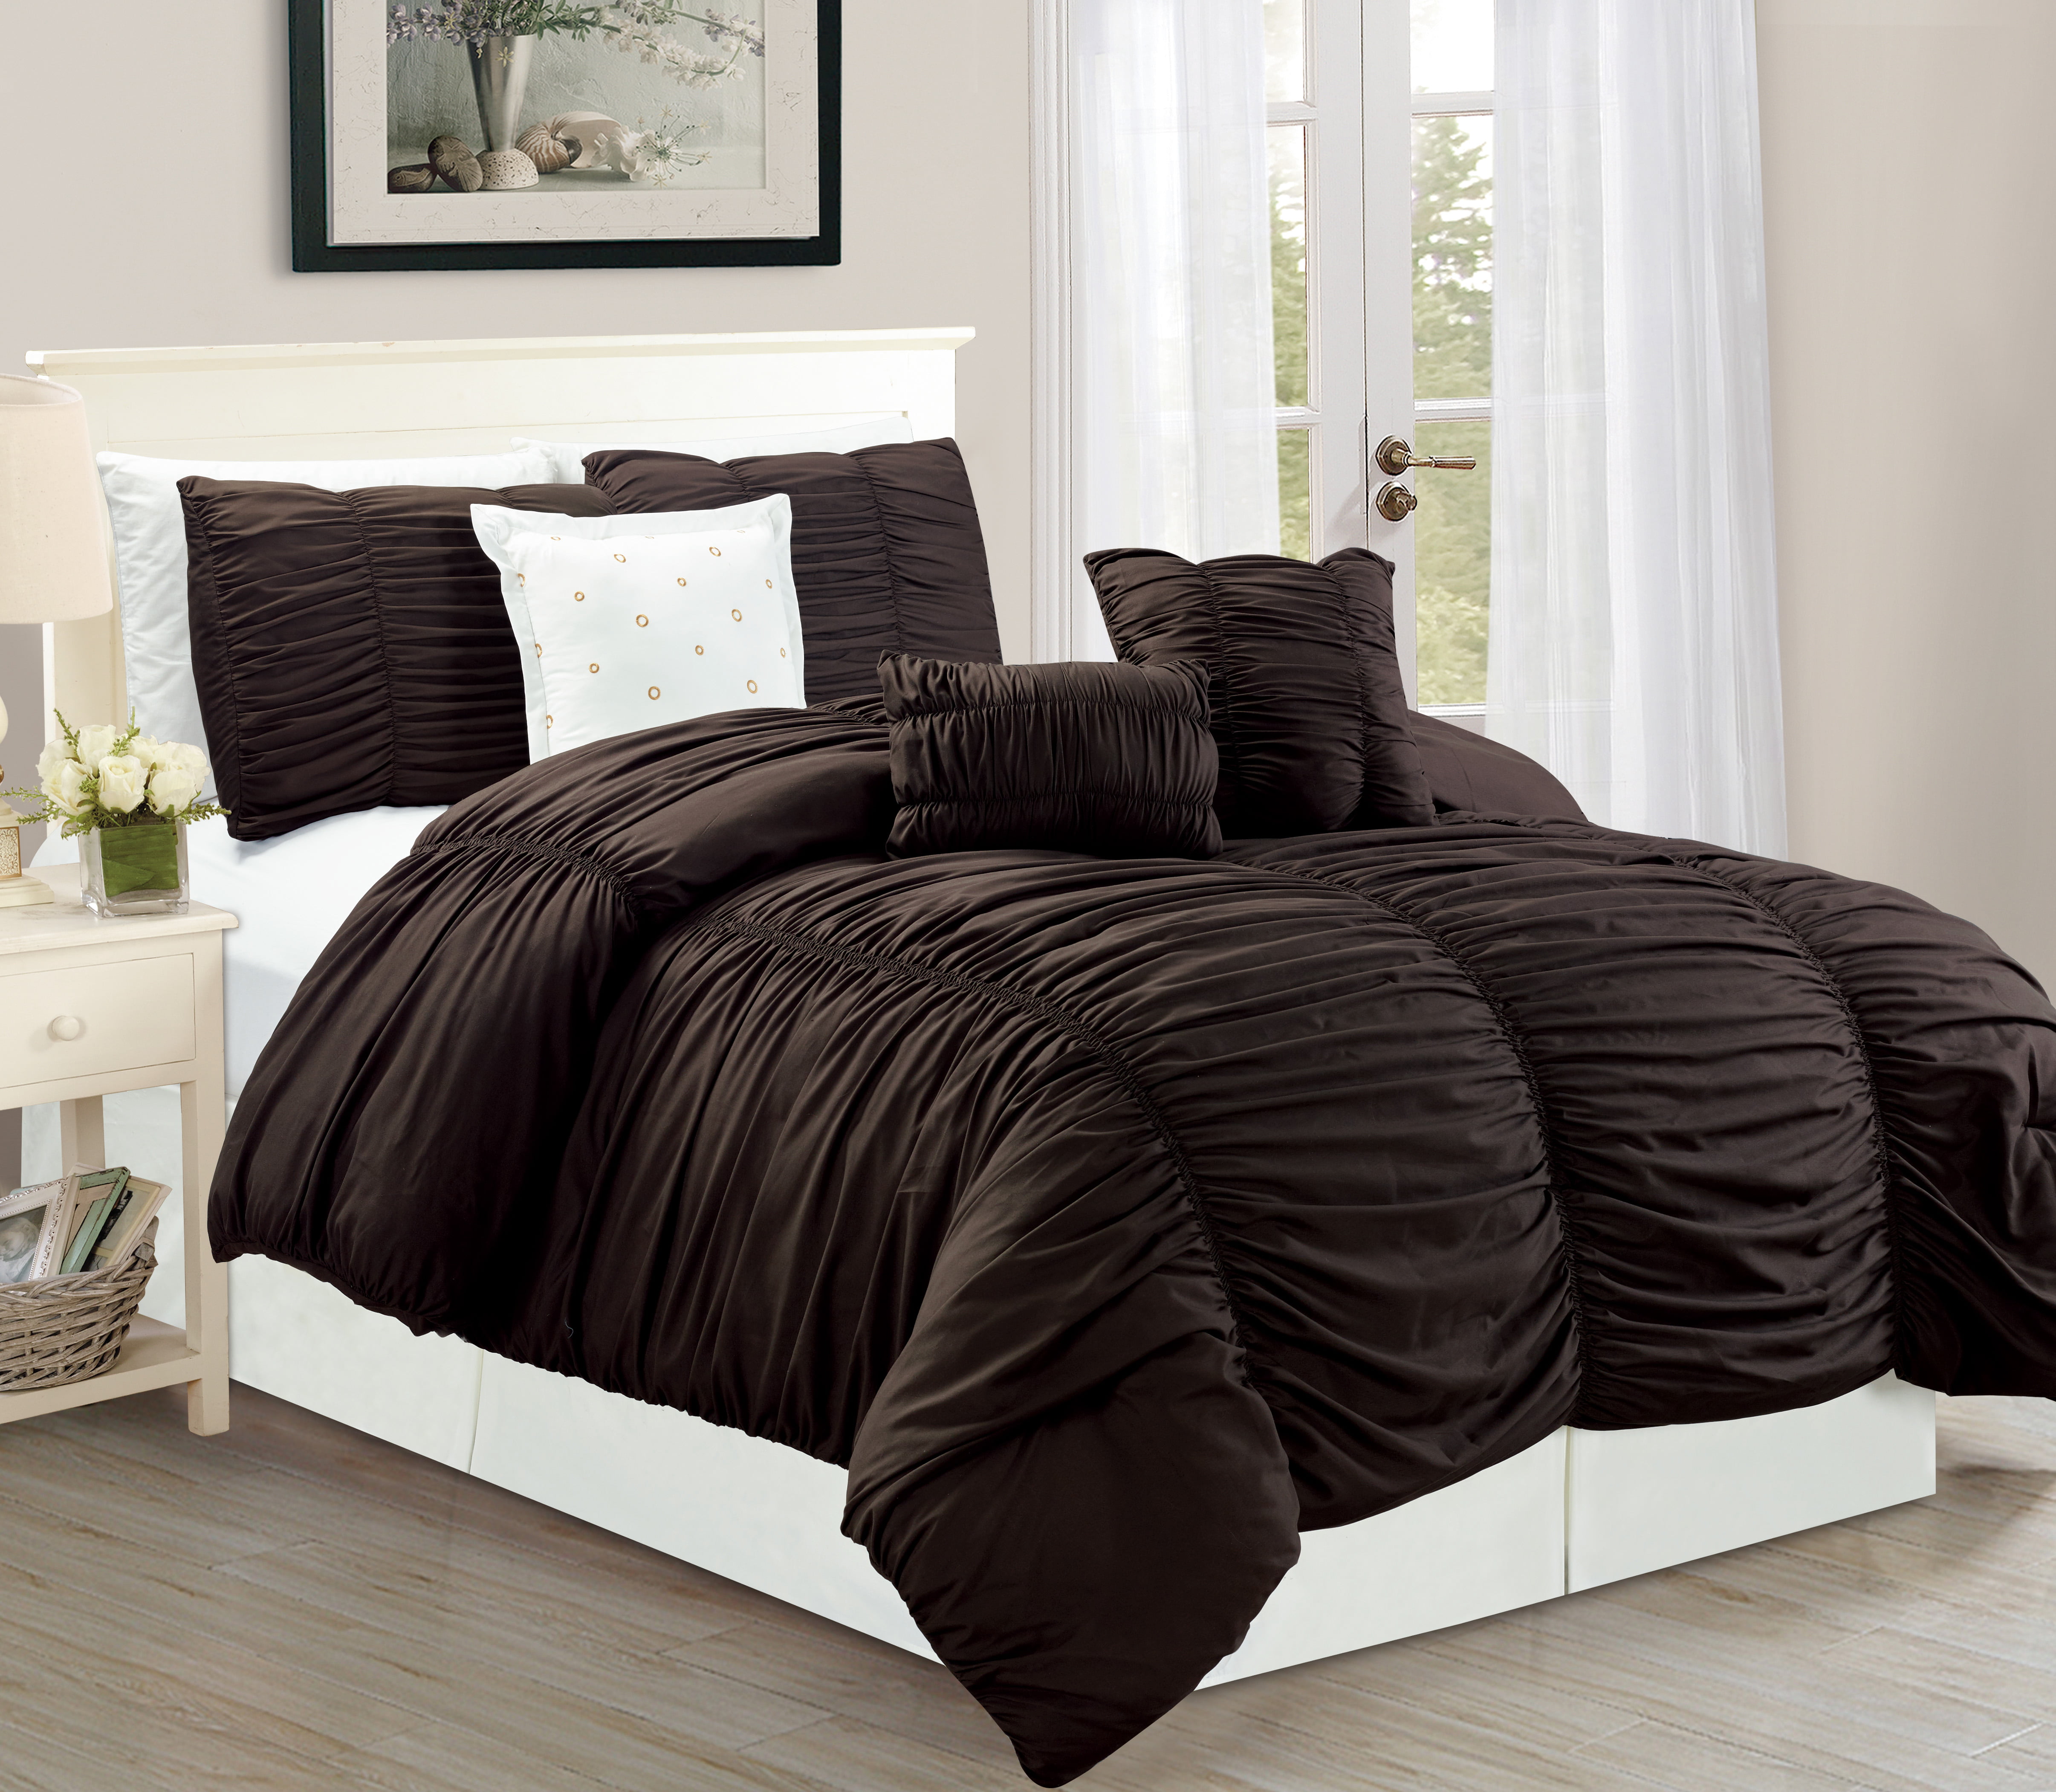 Wpm 7 Piece Royal Chocolate Brown Ruched Comforter Set Elegant Bed